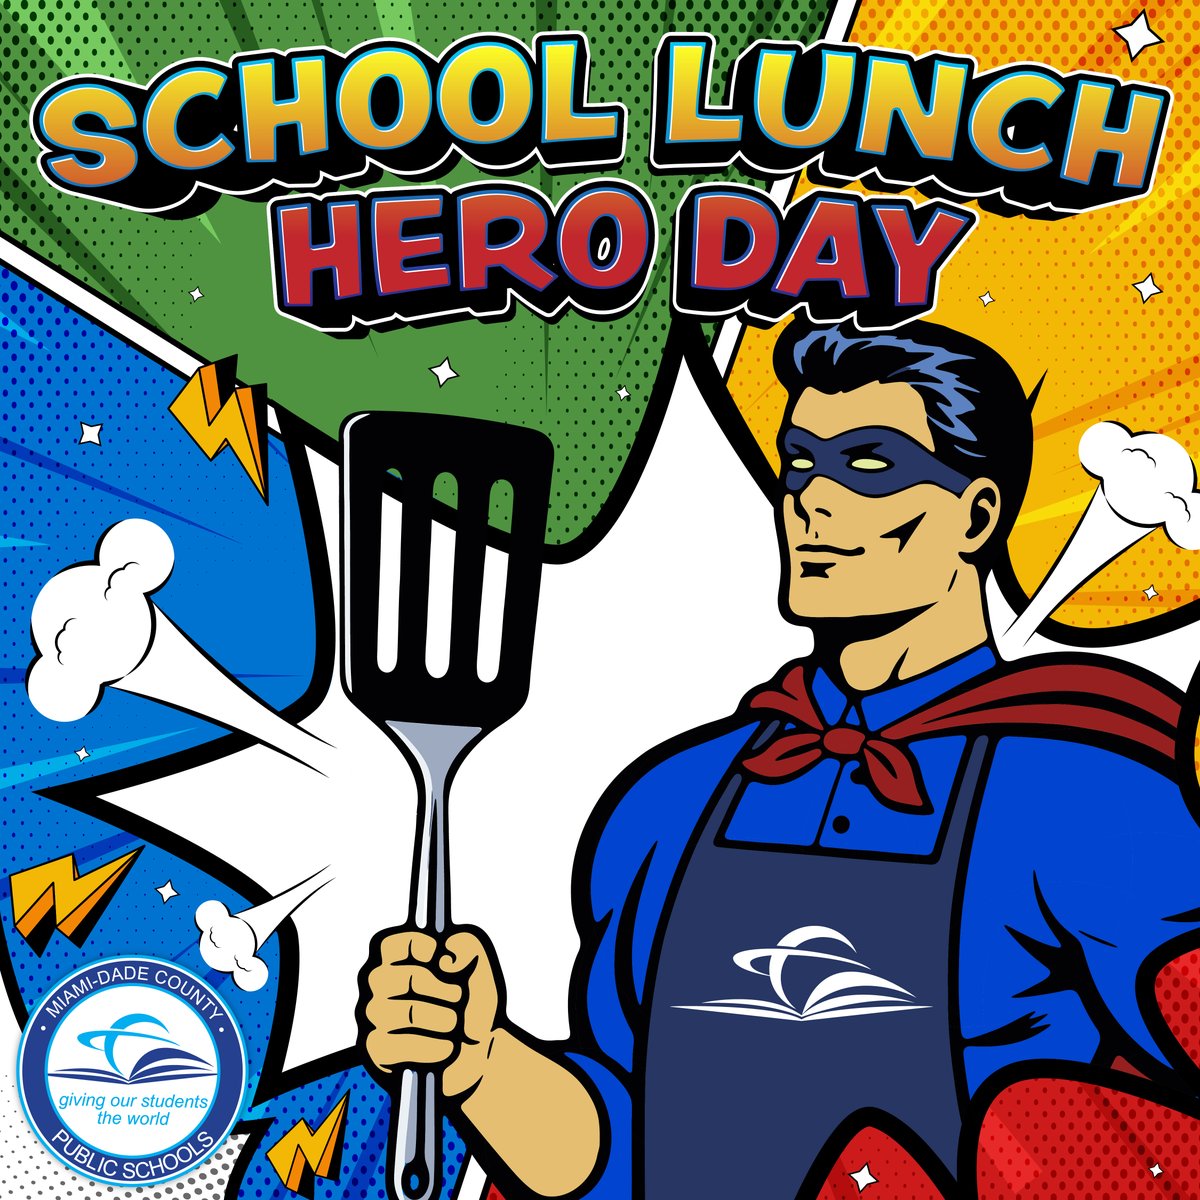 A BIG thank you to our incredible School Lunch Heroes! Today, we celebrate the amazing food service workers who keep our students fueled for success with delicious meals at @MDCPS. #SchoolLunchHeroDay #ThankALunchHero